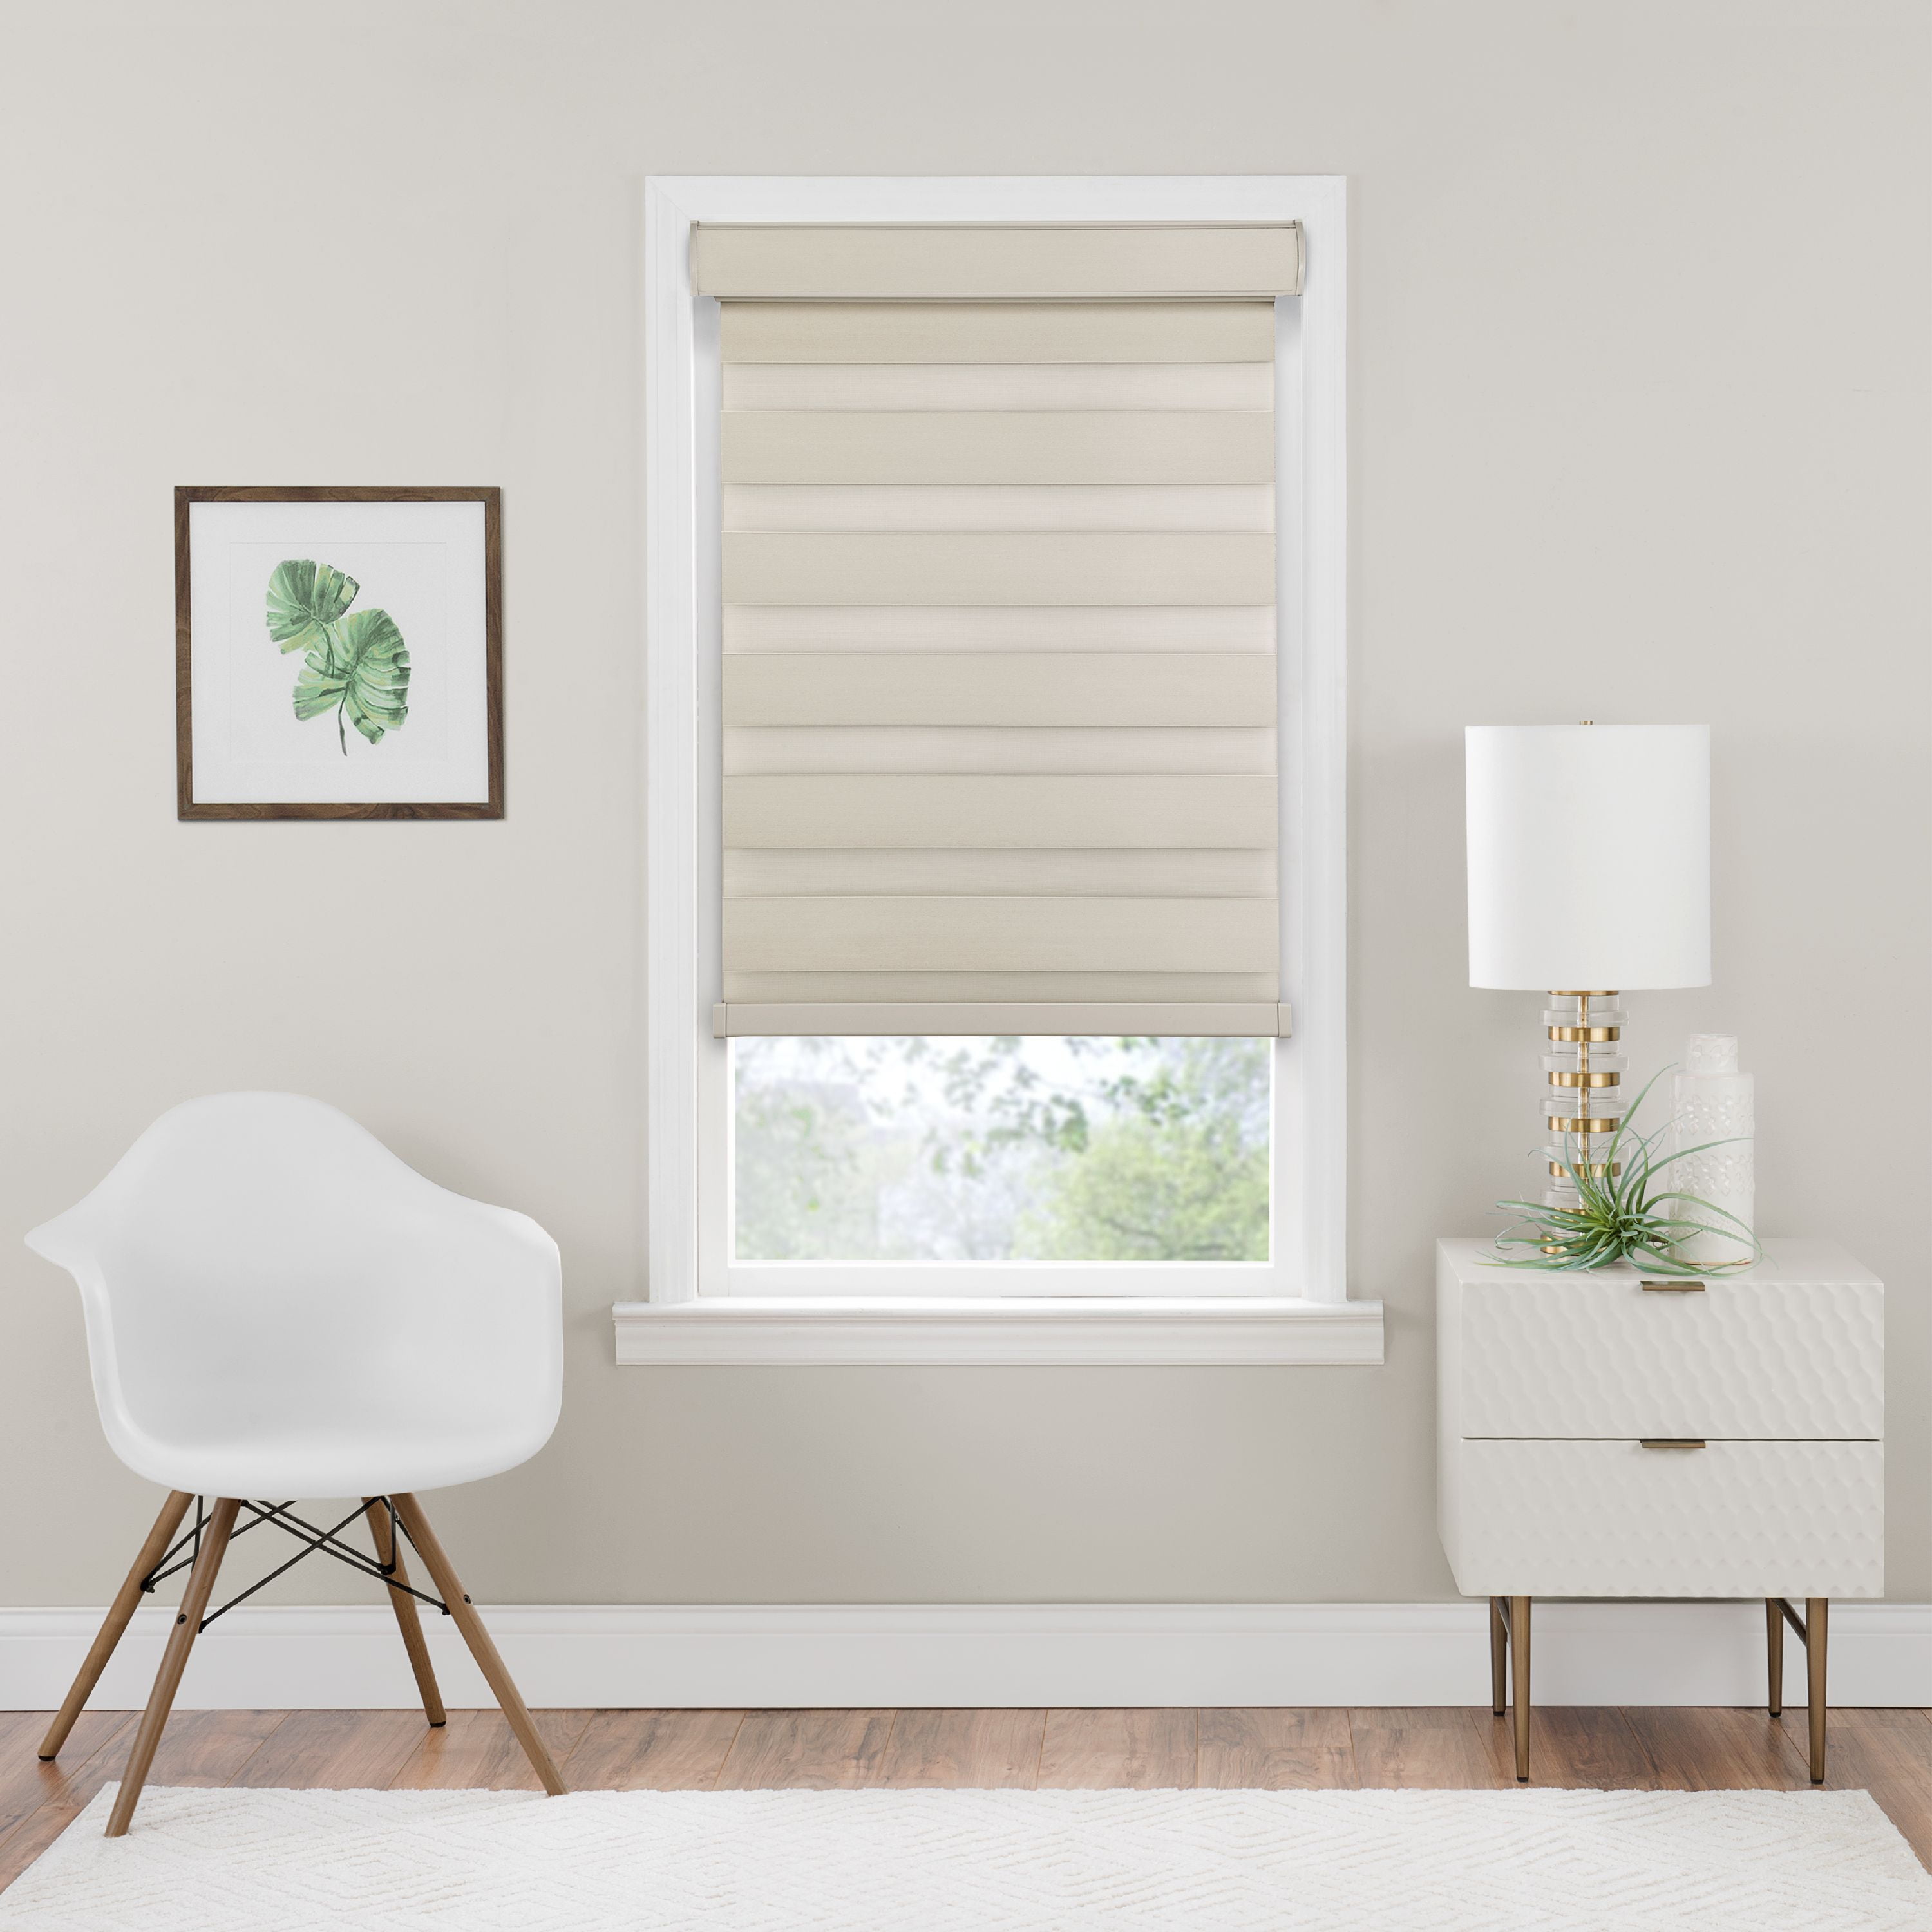 Details about   Achim Home Furnishings Cordless Celestial Sheer Double Layered Shade 33 x 72 